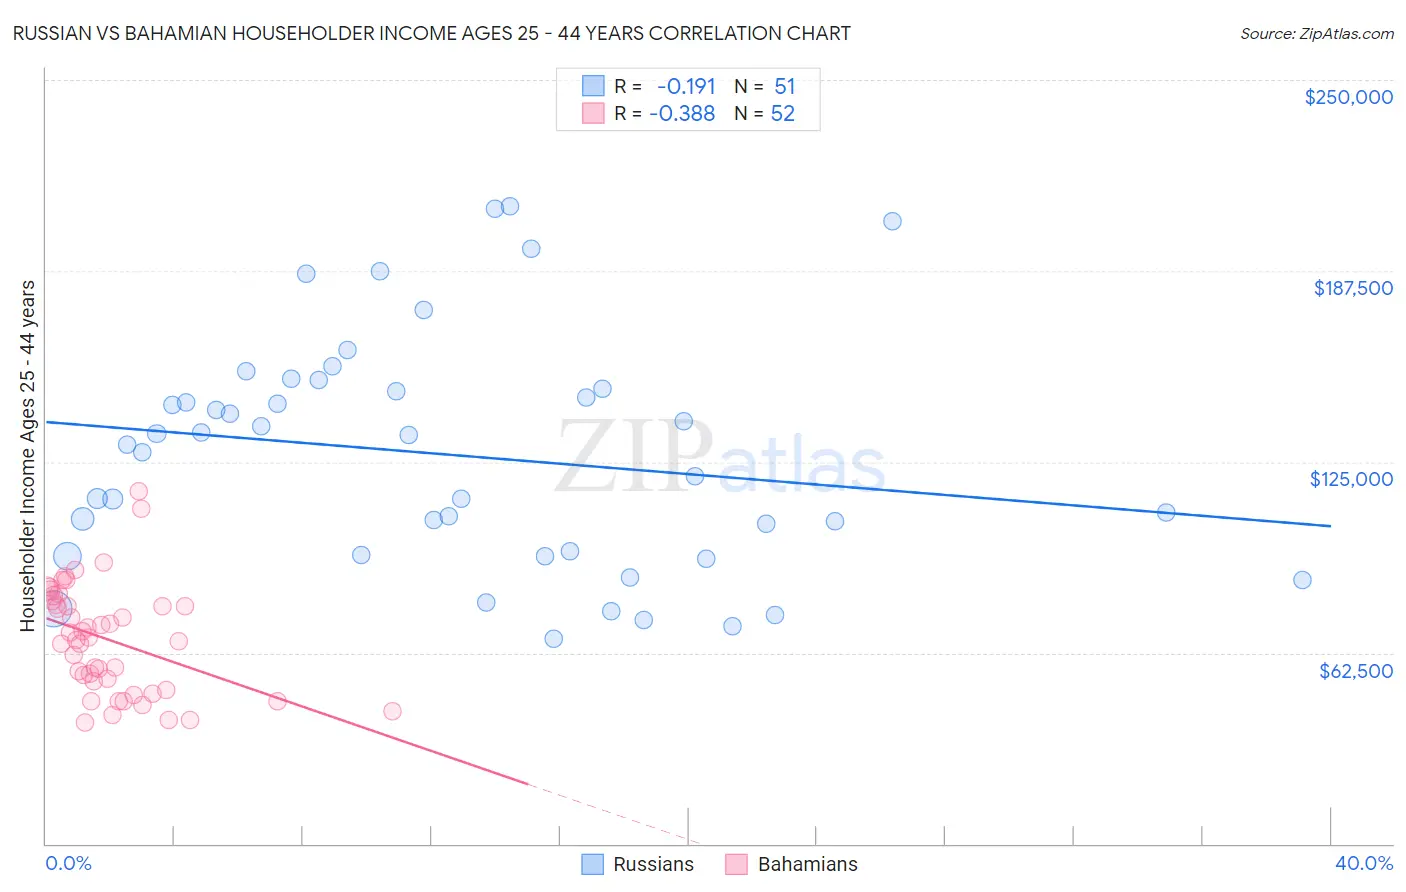 Russian vs Bahamian Householder Income Ages 25 - 44 years